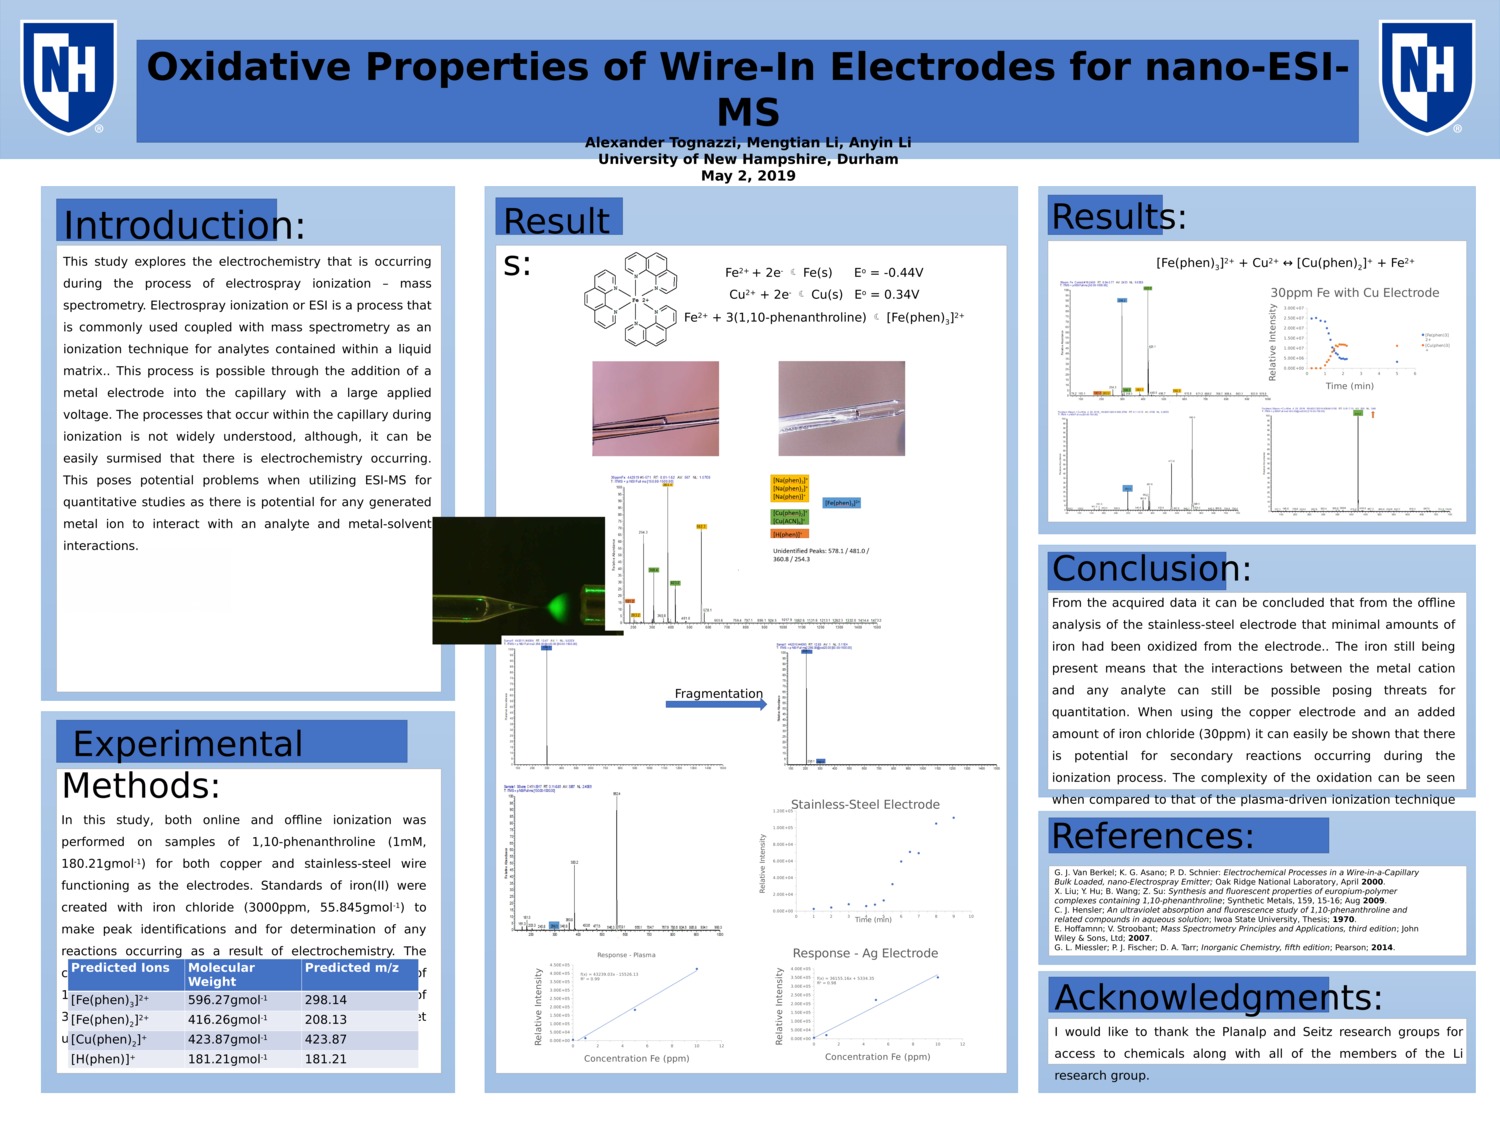 Oxidative Properties Of Wire-In Electrodes For Nano-Esi-Ms by ajt1019